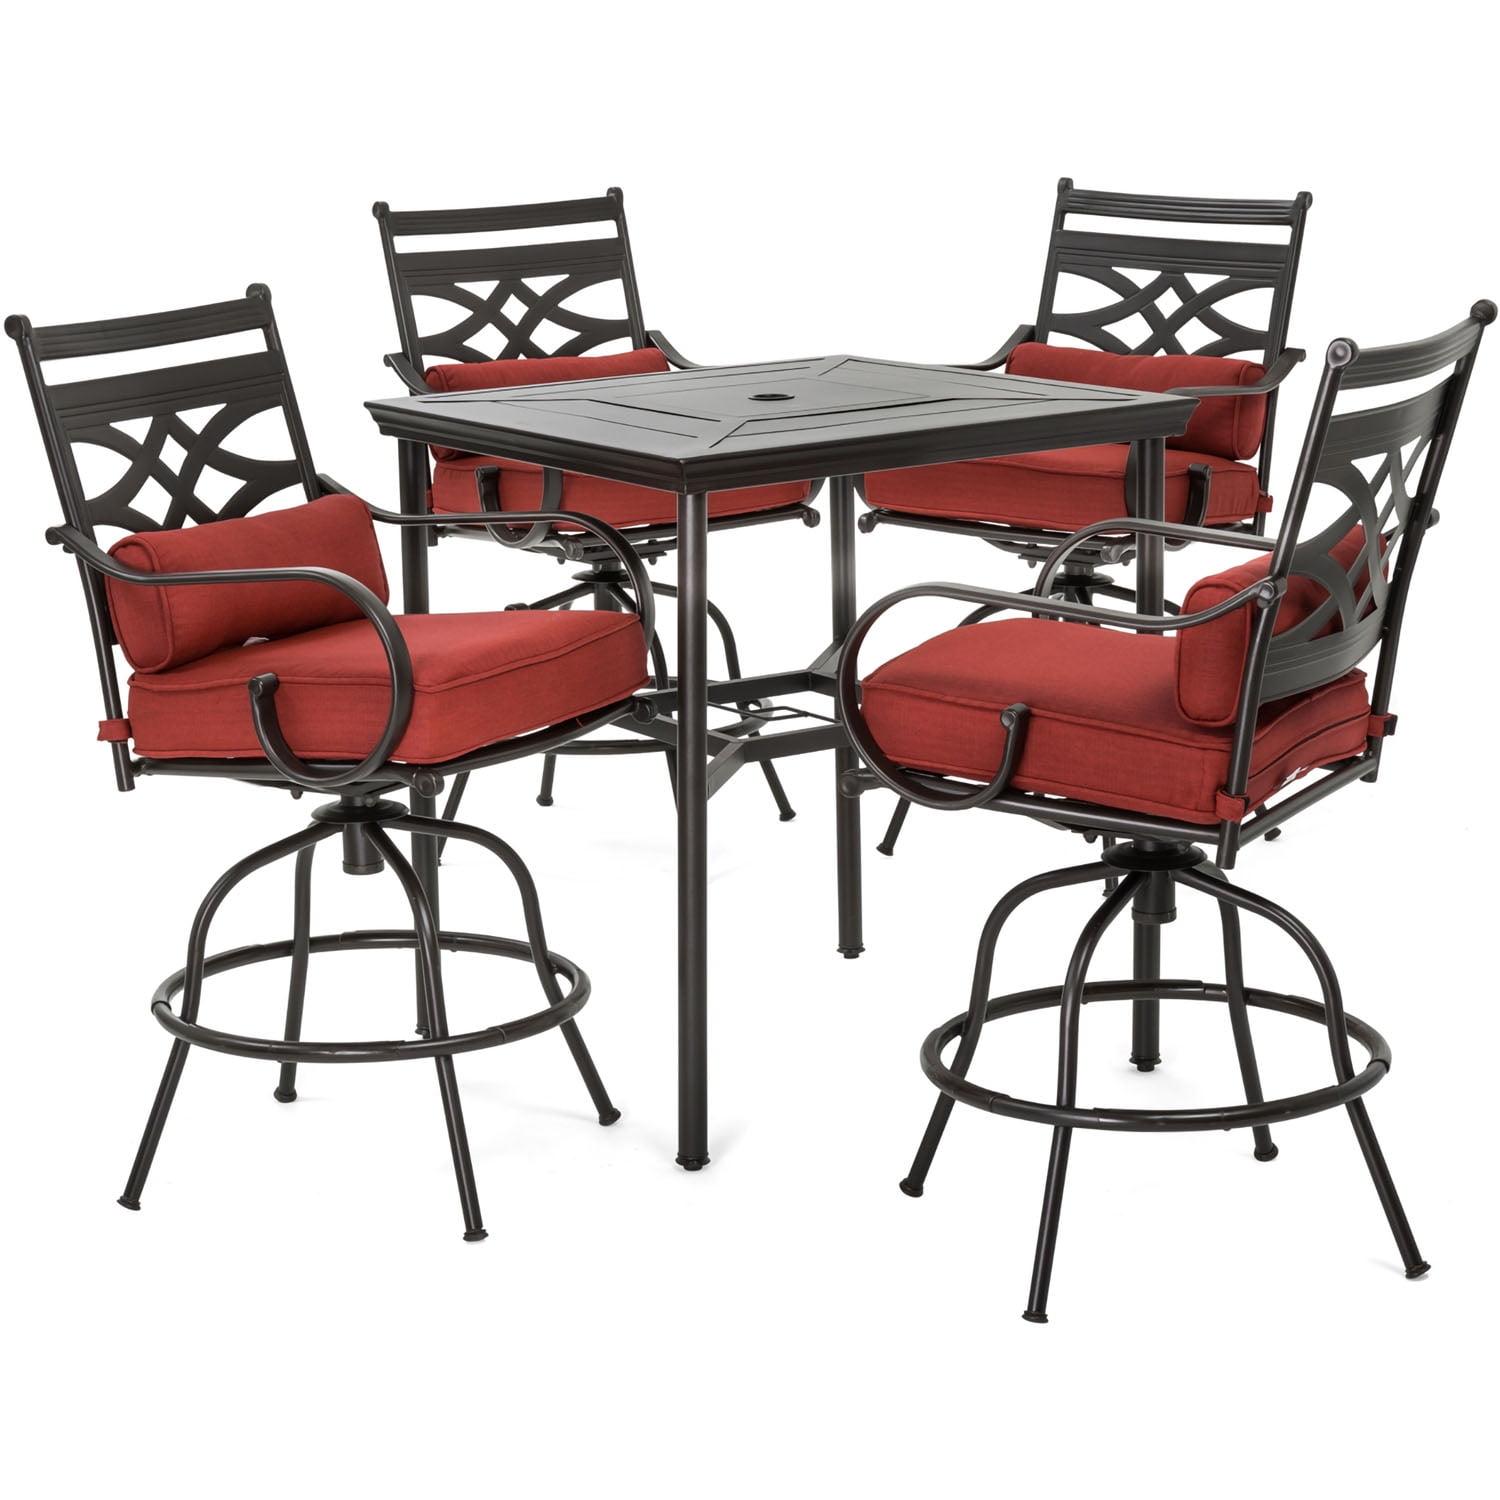 Montclair 5-Piece Steel Outdoor Dining Set with Chili Red Cushions